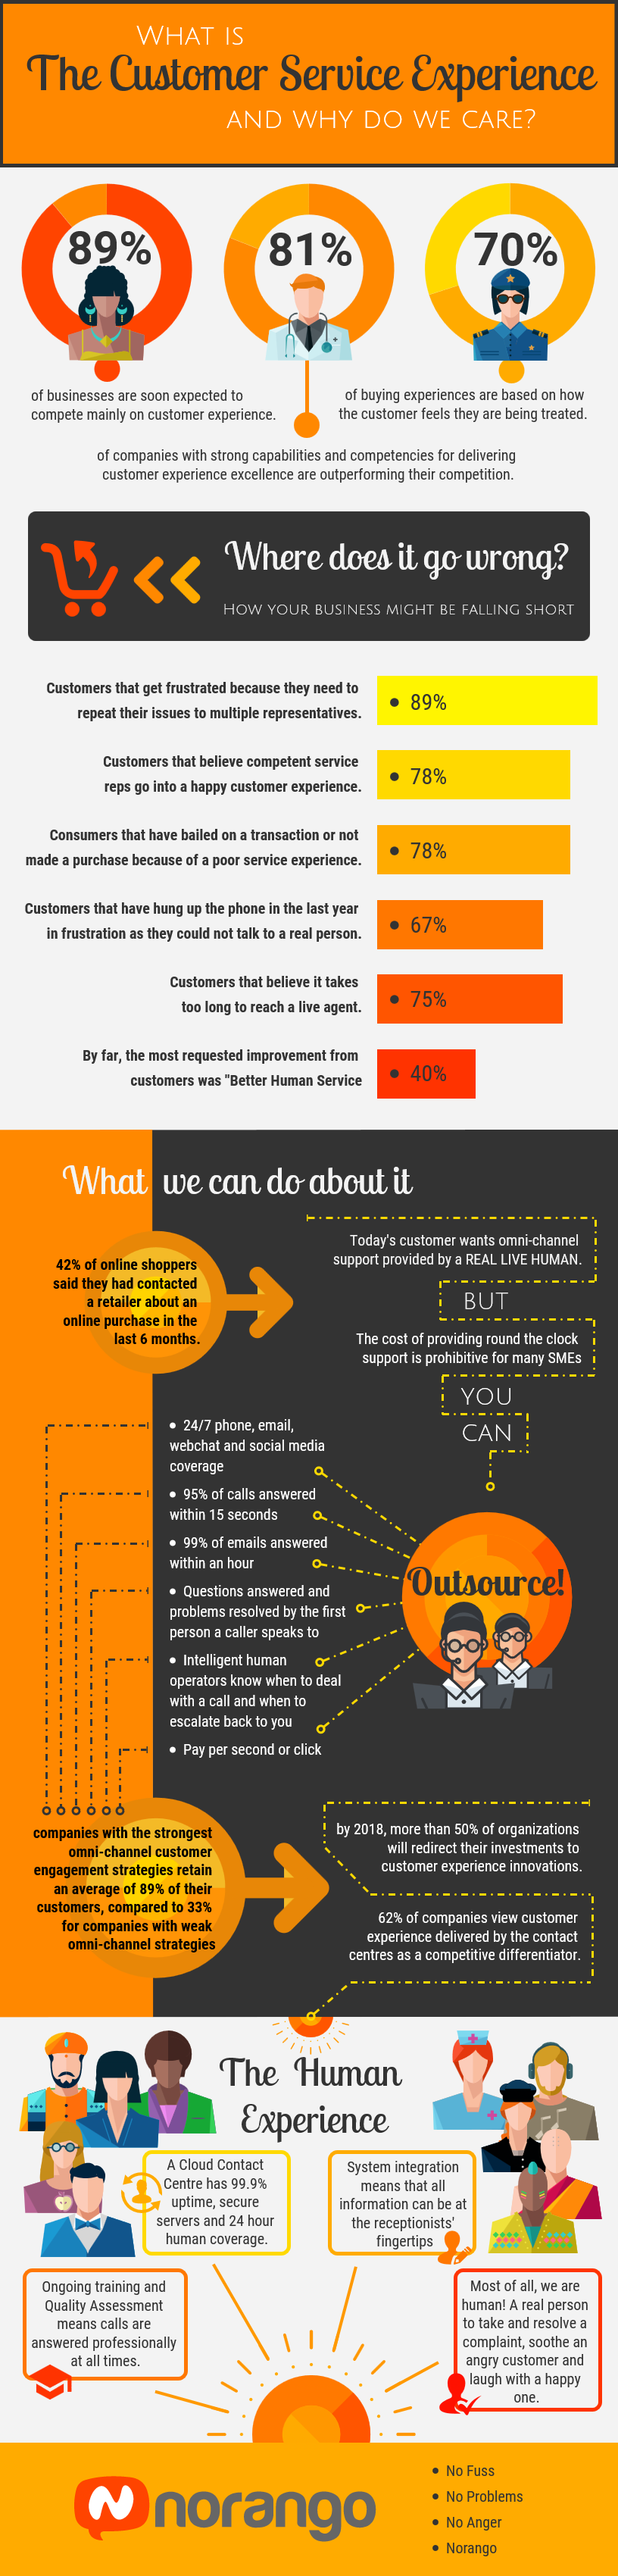 customer service experience infographic